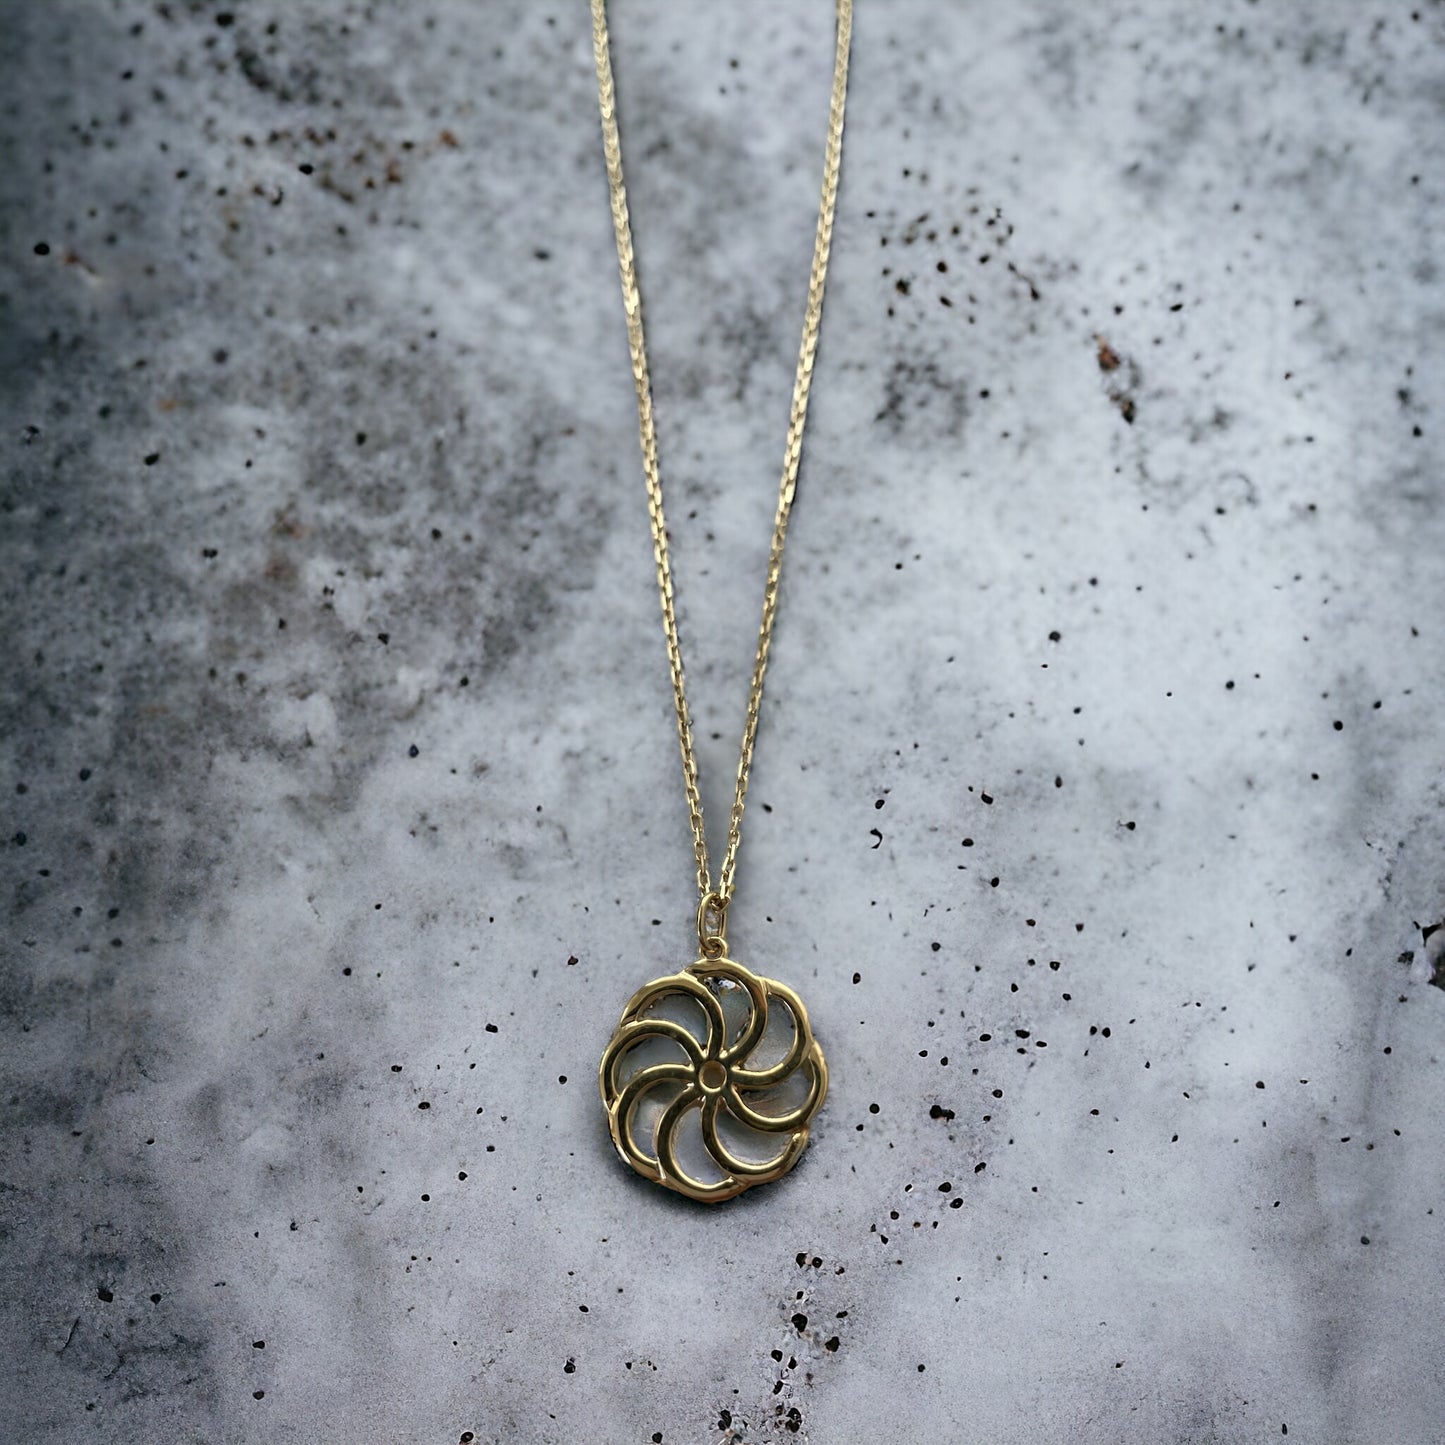 Eternity sign Necklace